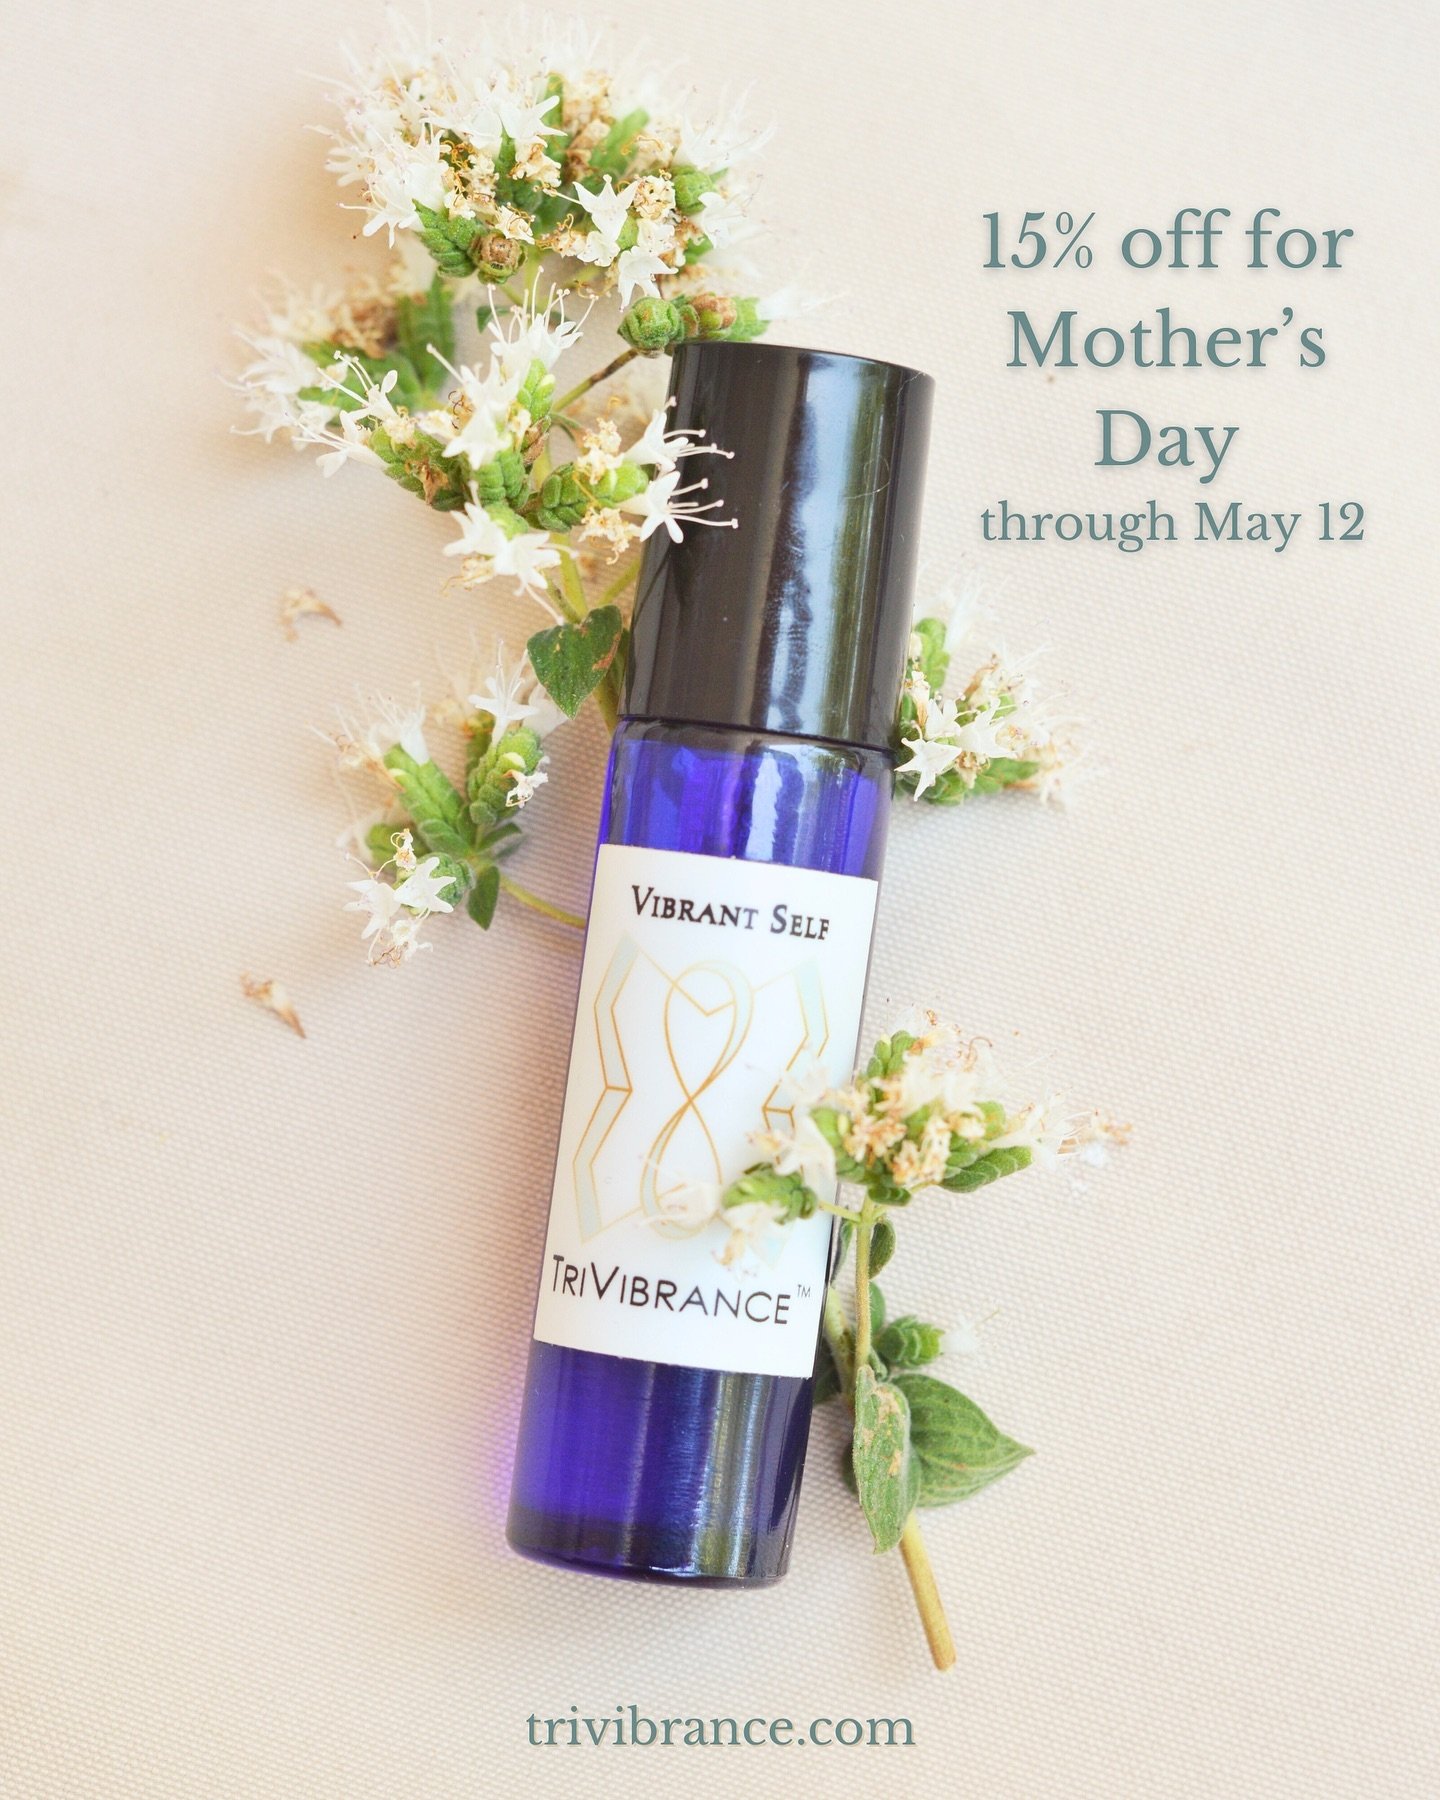 15% OFF Vibrant Self &trade; for Mother&rsquo;s Day through May 12! 🌹

This blends supports the release of disharmonious energies like unworthiness, discontent &amp; anxiety while supporting the flow of higher vibrational emotions like self-love, jo